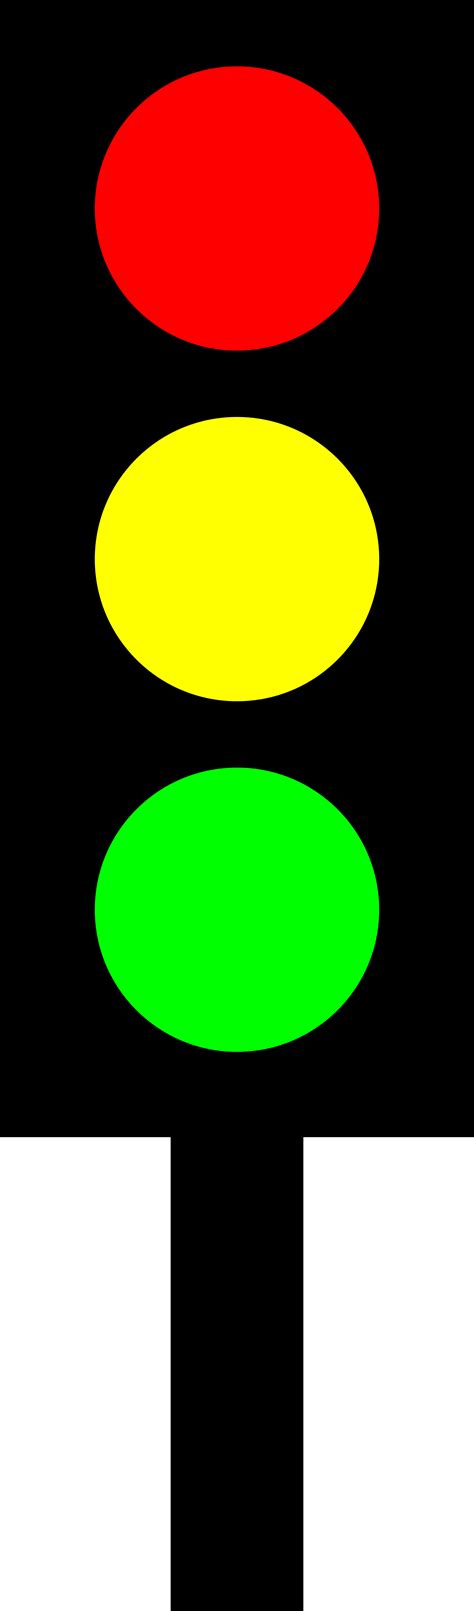 Png Traffic Lights Clipart Best